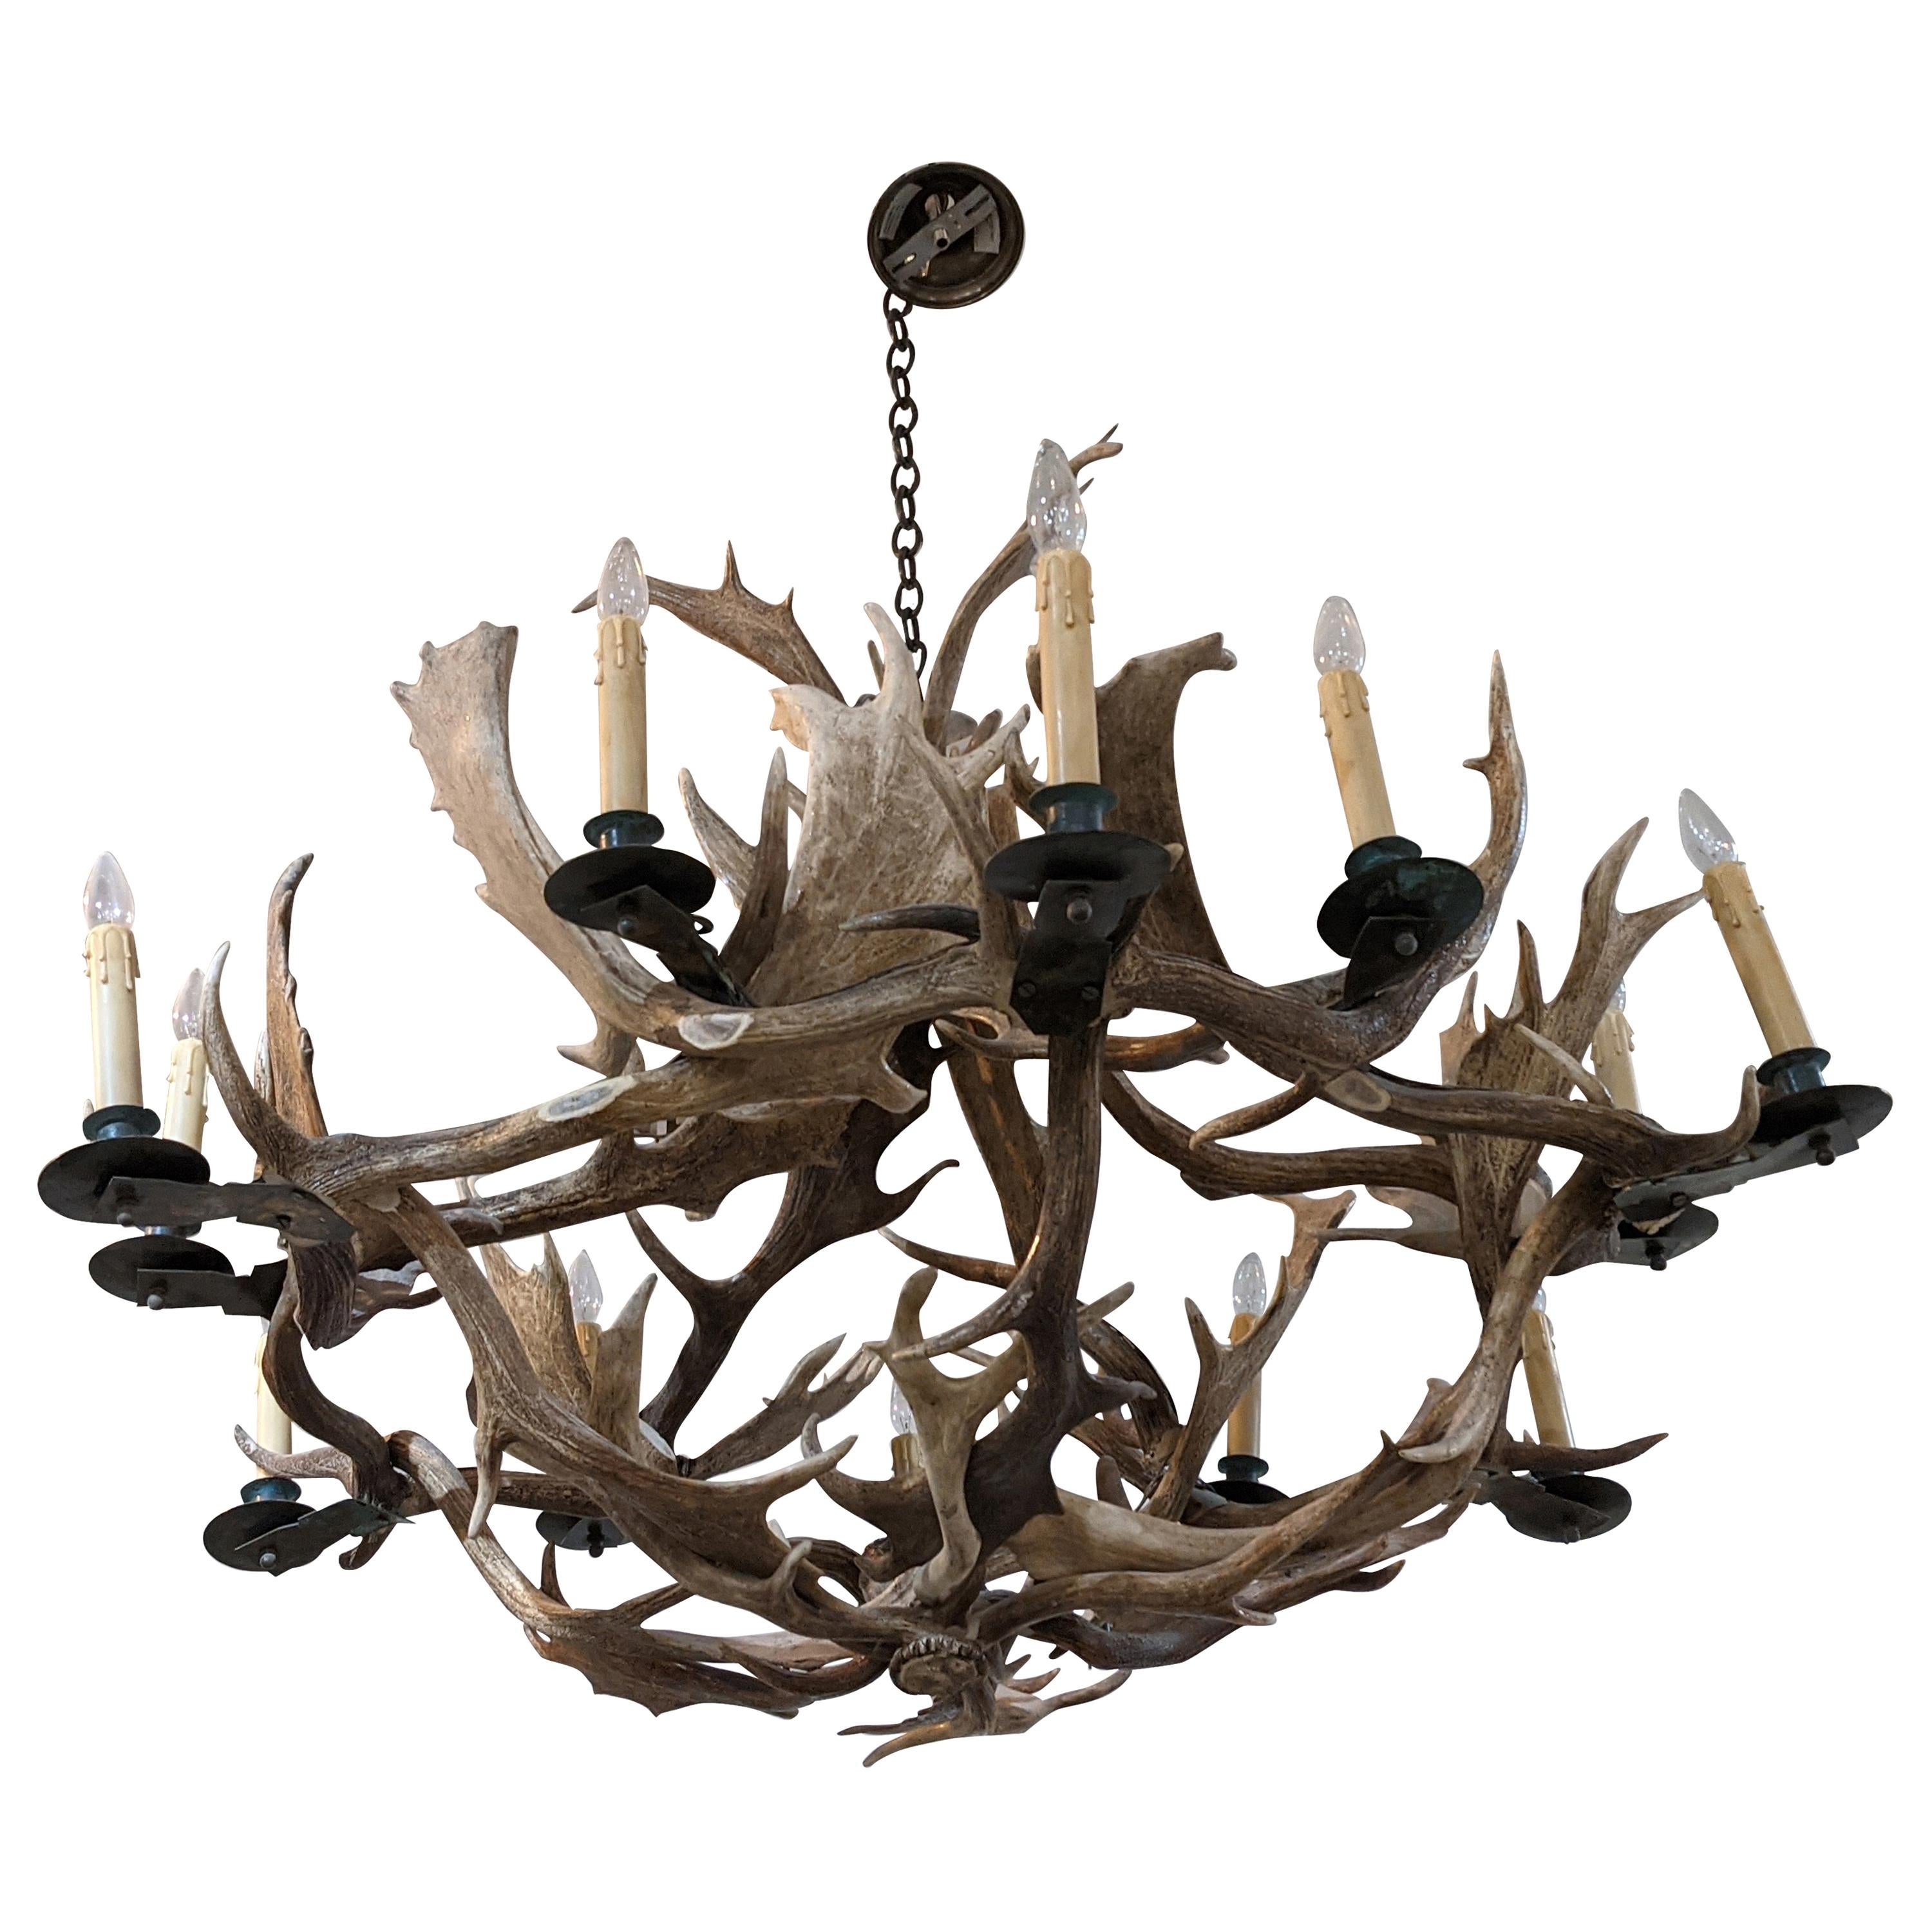 19th Century Horns Chandelier from North America